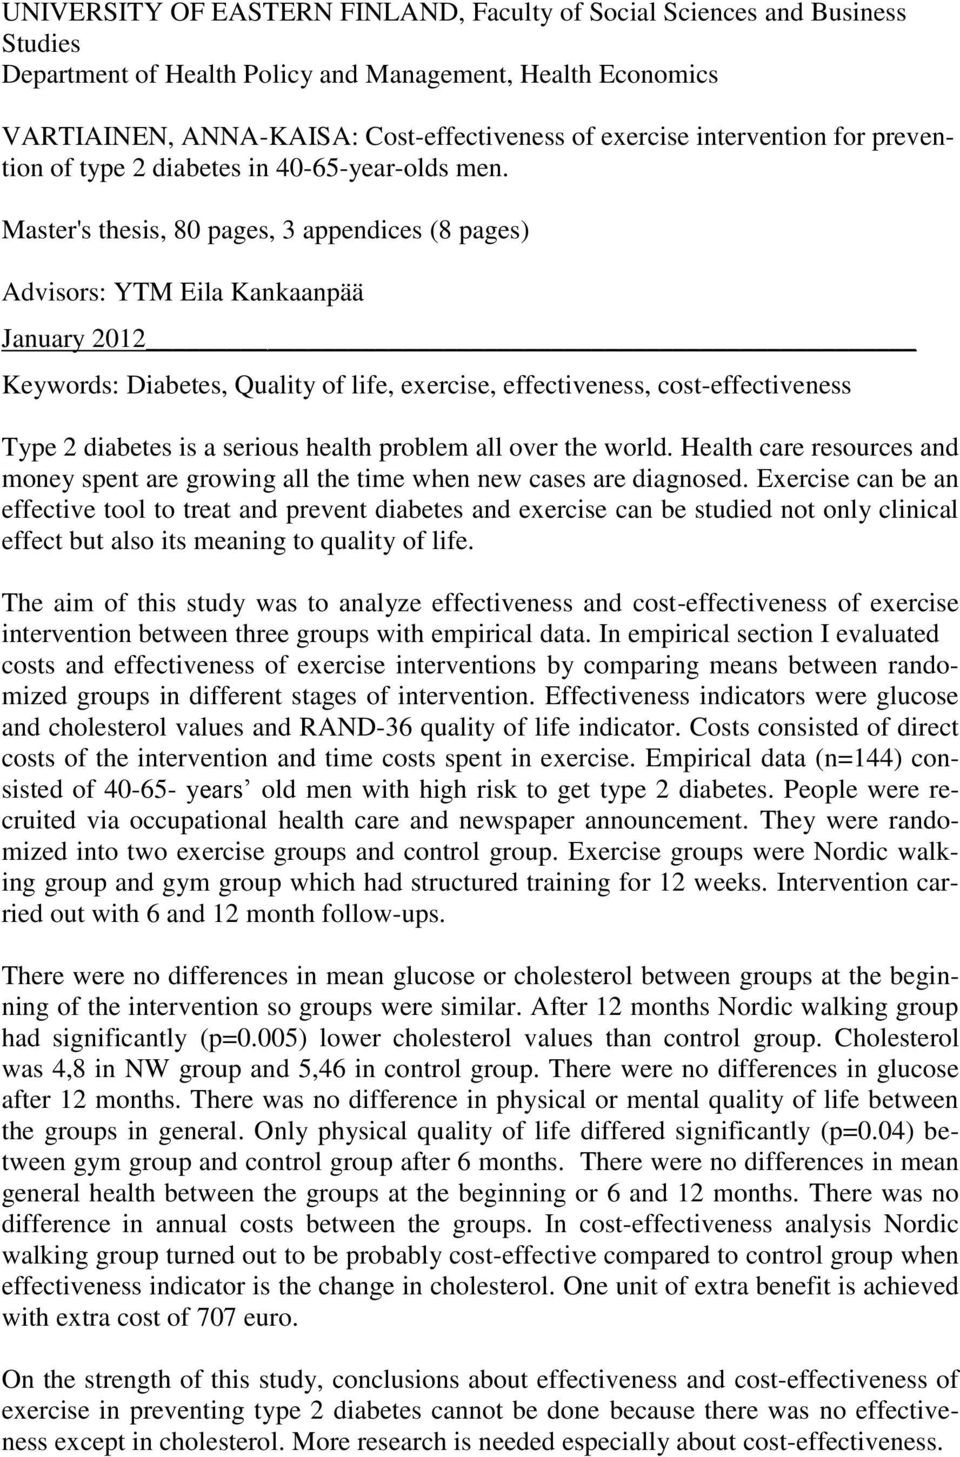 Master's thesis, 80 pages, 3 appendices (8 pages) Advisors: YTM Eila Kankaanpää January 2012 Keywords: Diabetes, Quality of life, exercise, effectiveness, cost-effectiveness Type 2 diabetes is a